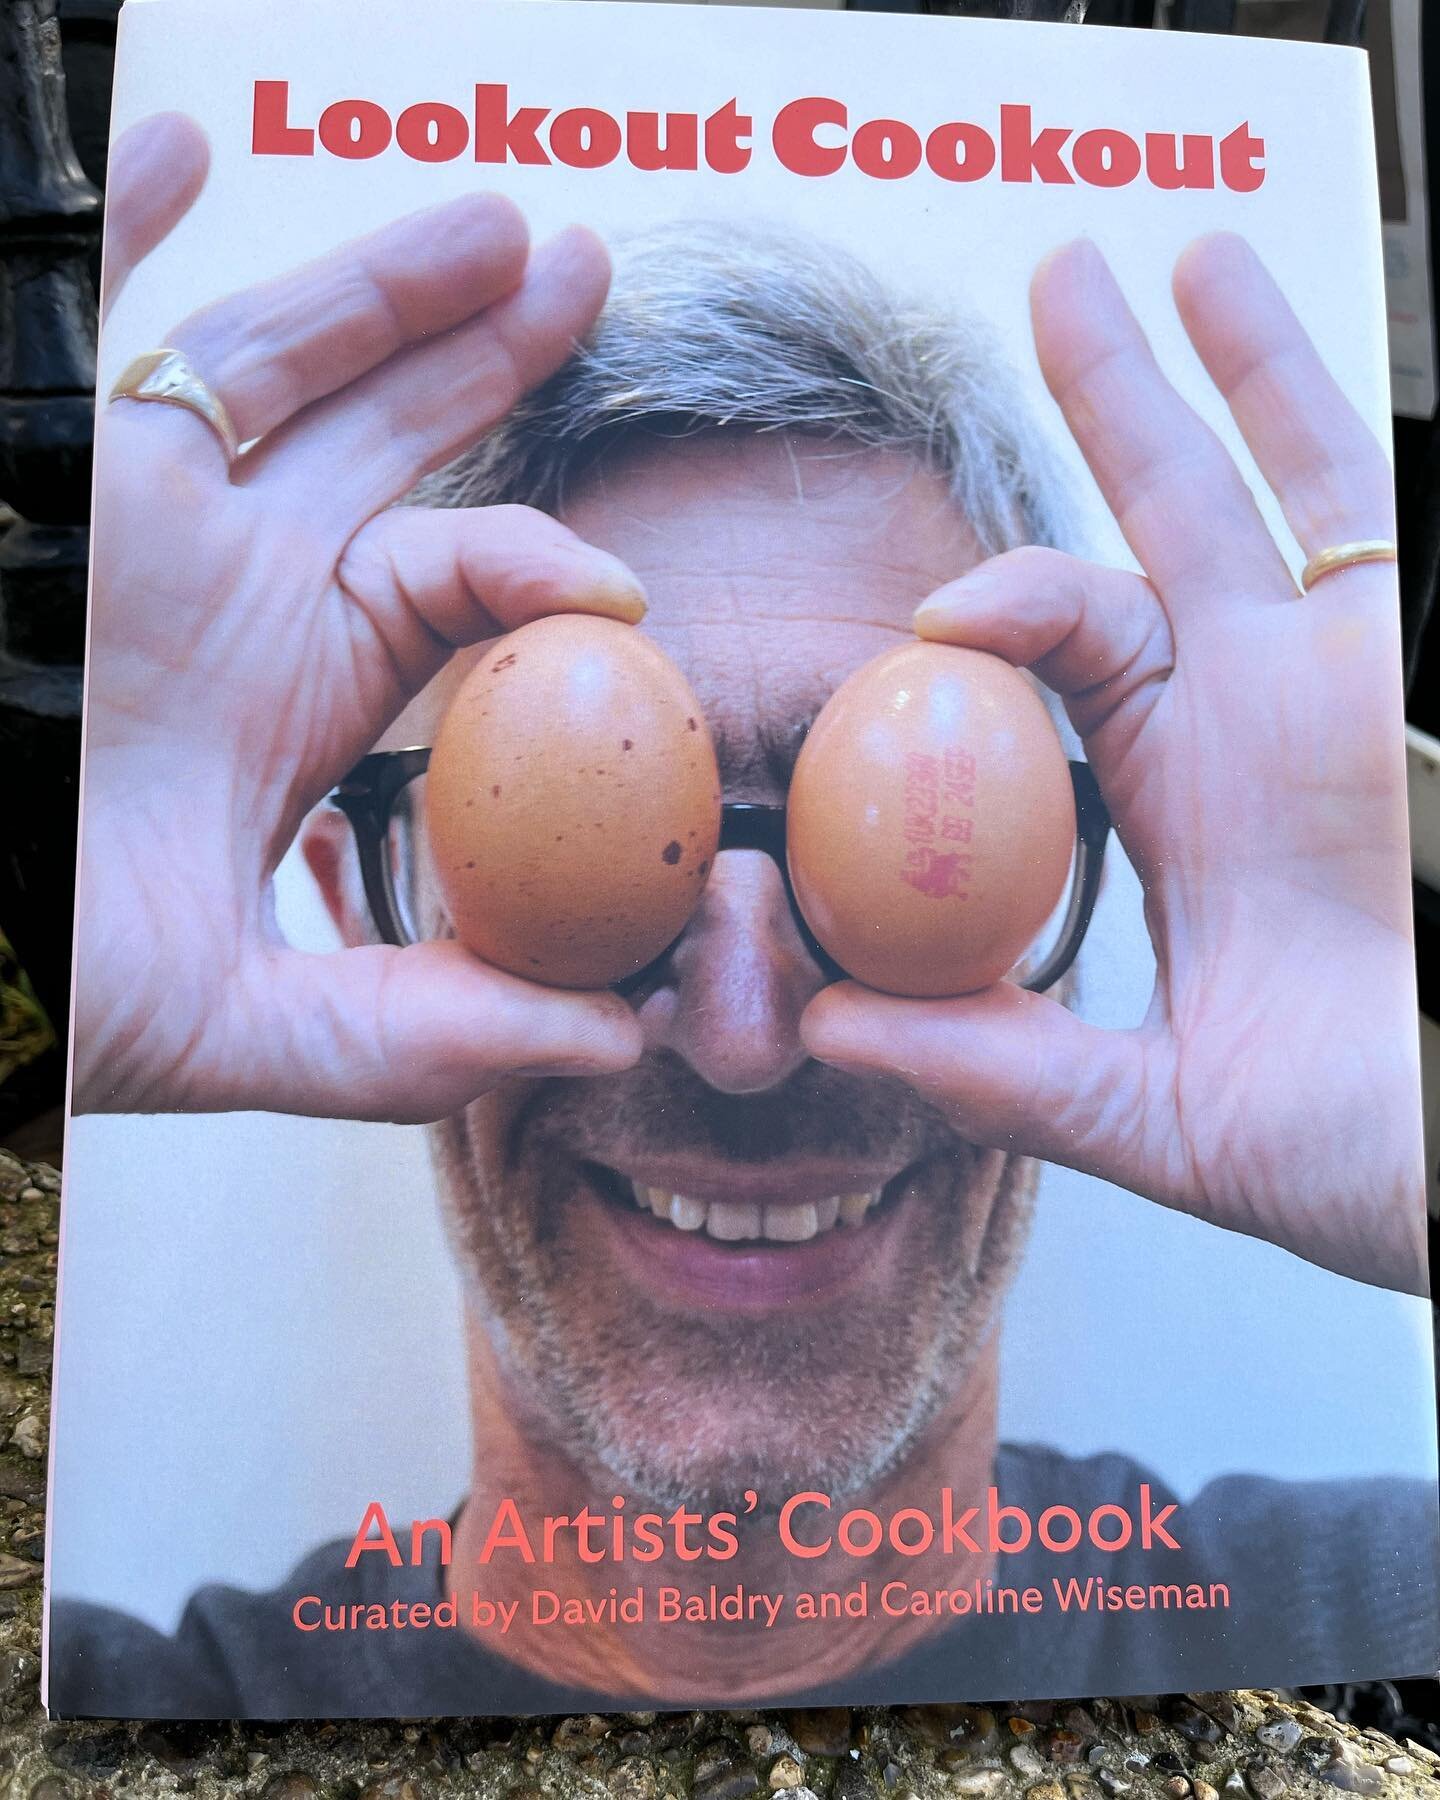 Come to the launch of Lookout Cookout tomorrow, Easter Saturday from 12 noon to 4pm at the Aldeburgh Beach Lookout. Roger Hardy cooks his recipe Freud Eggs and Bacon for us all to taste. The launch party is sponsored by Suffolk Coastal Estate Agents.